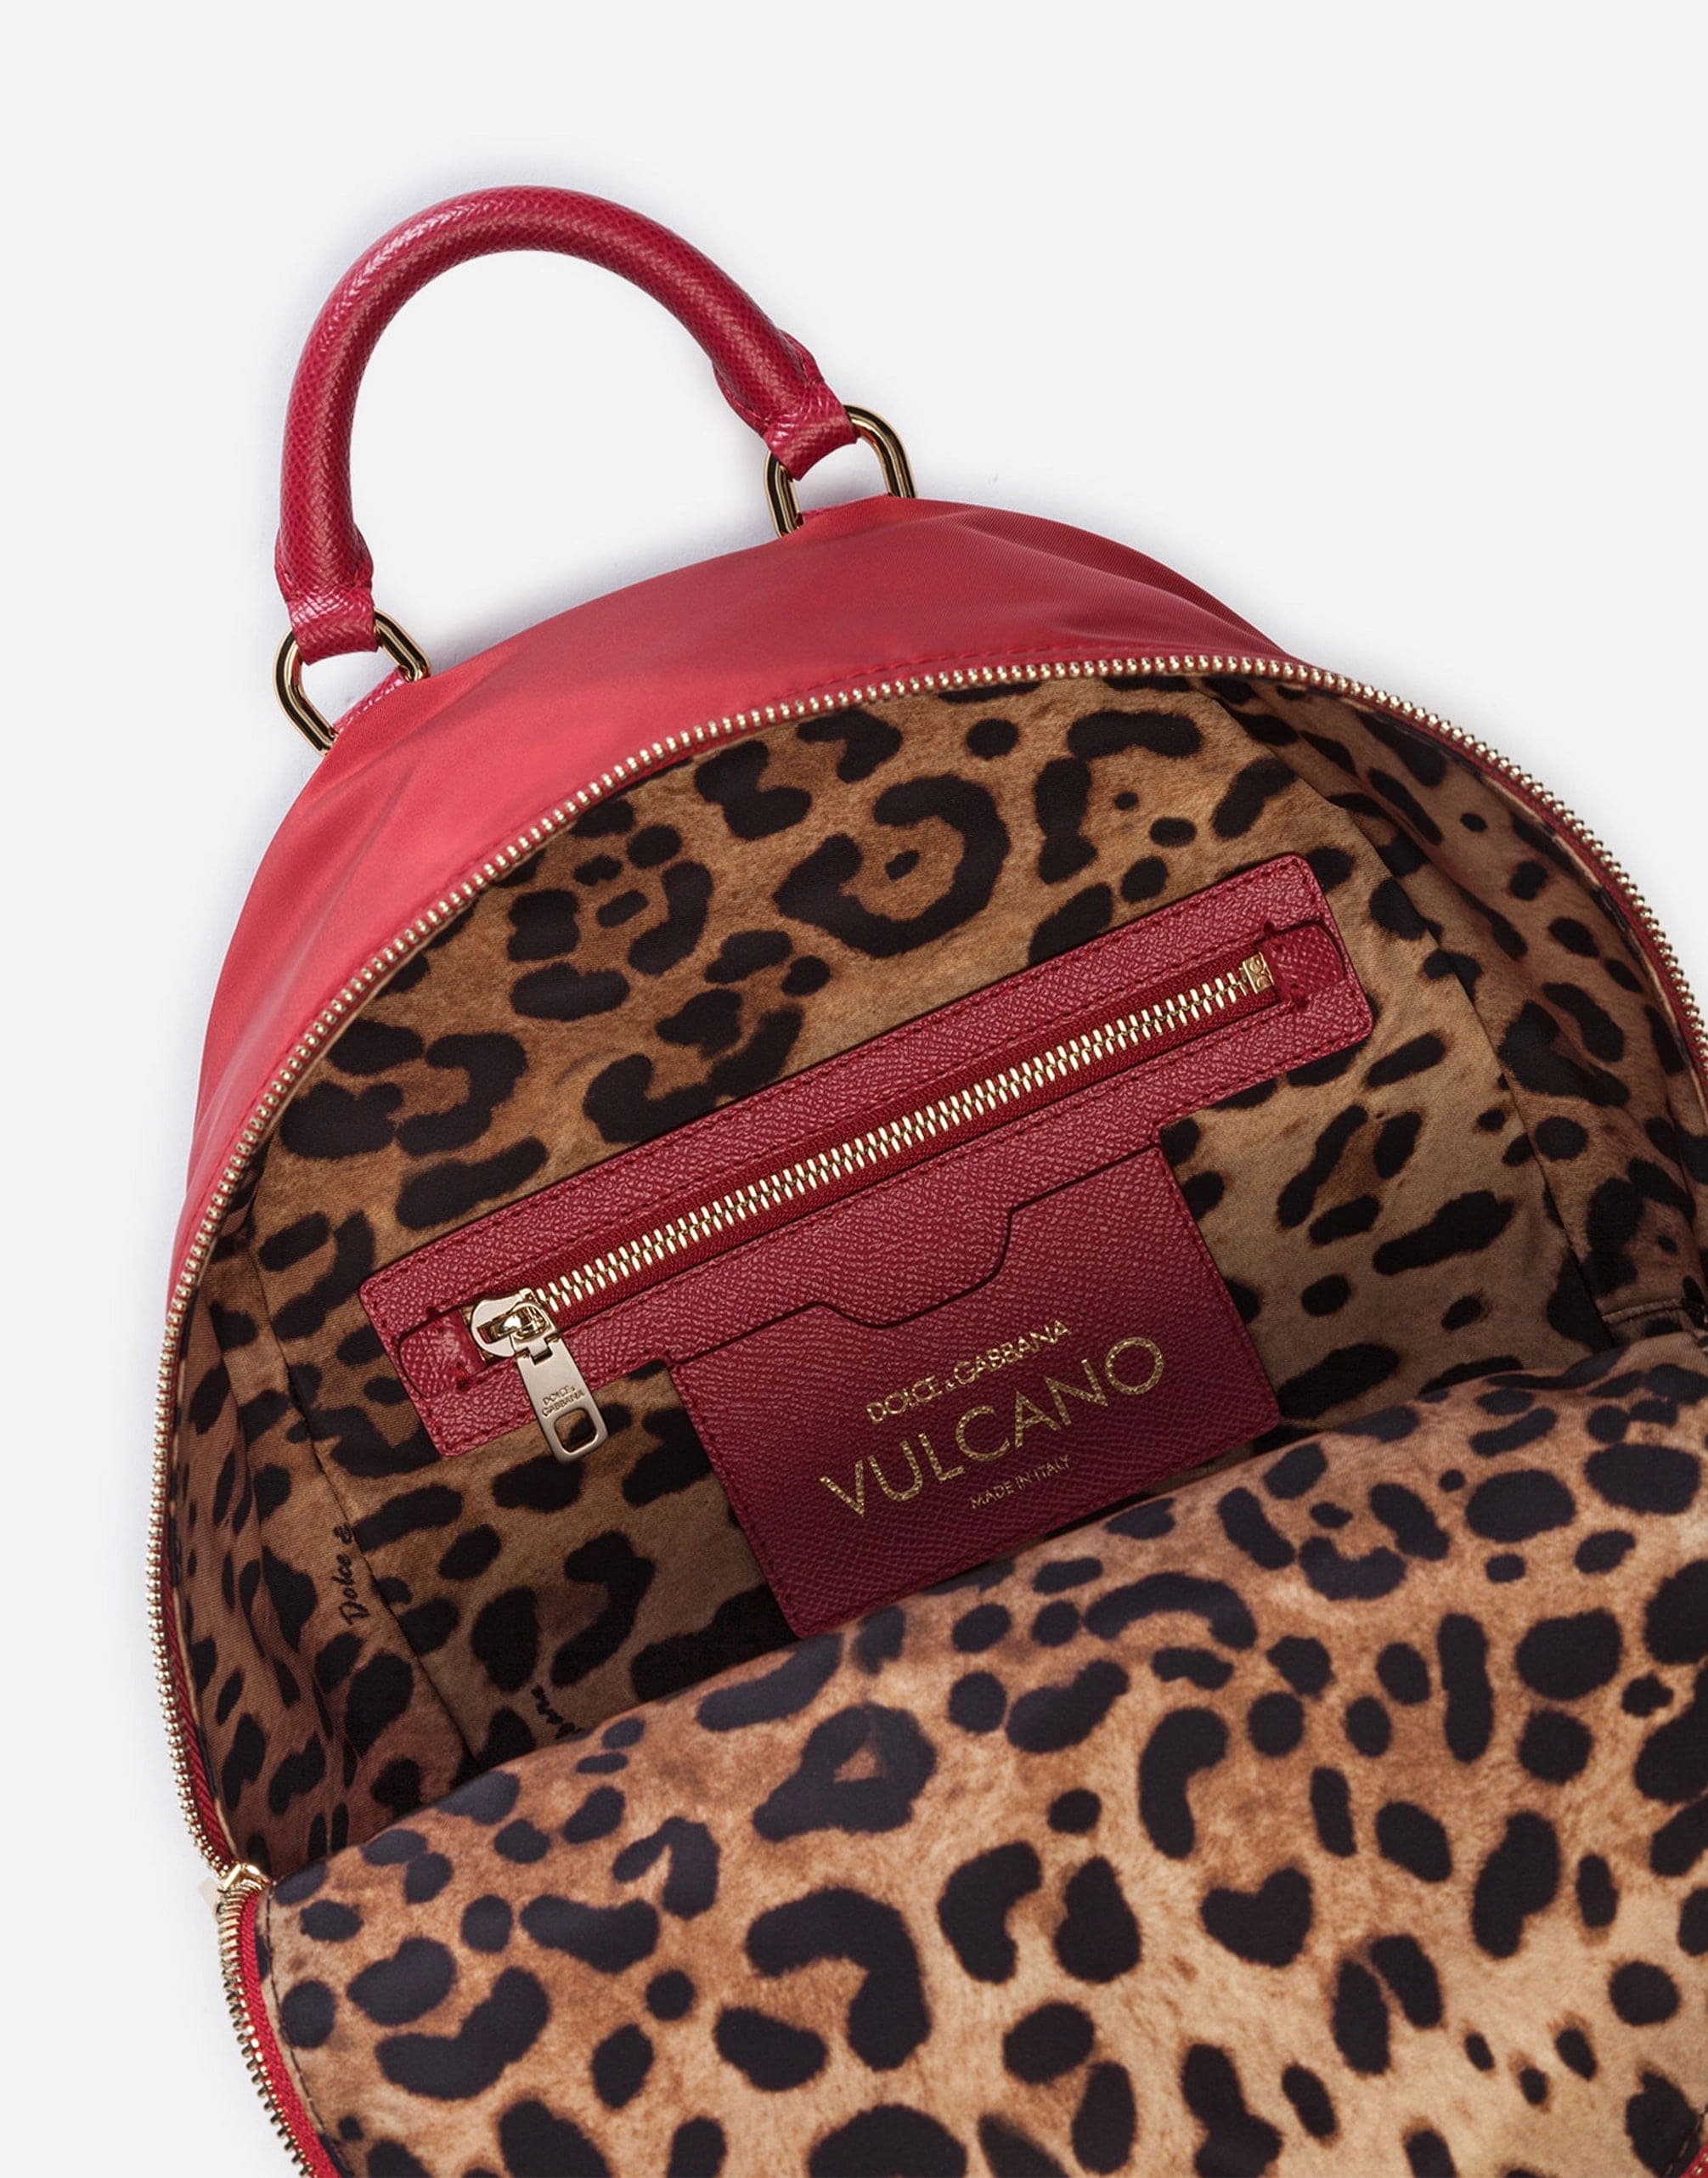 Dolce & Gabbana Small Vulcano Backpack In Nylon With Designers' Patches